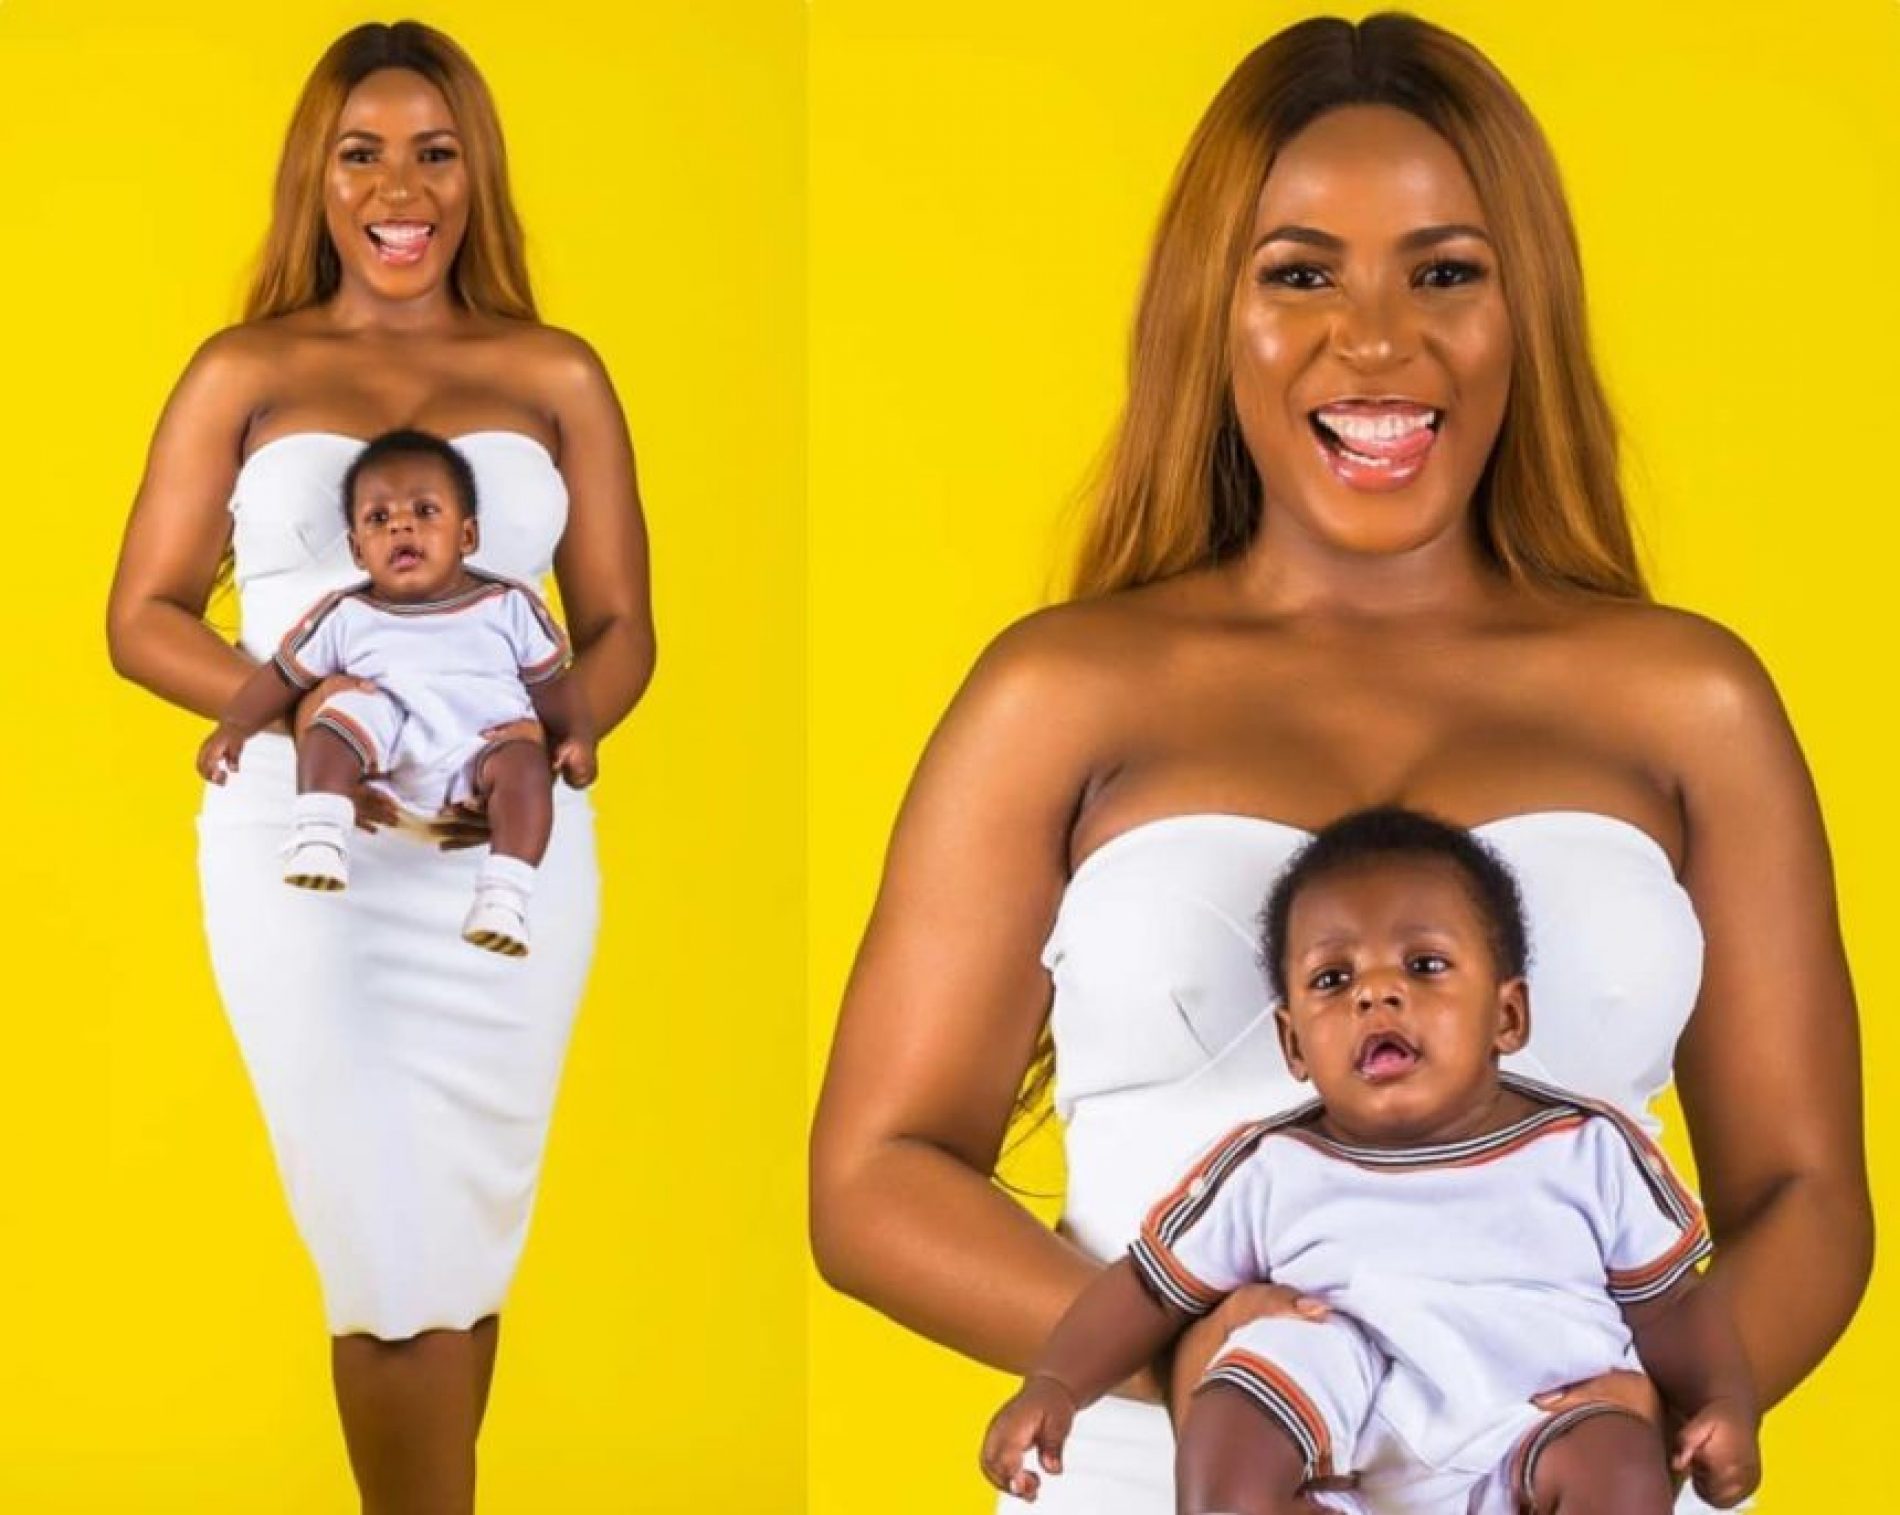 Nigerians Do Not Empathize With Linda Ikeji, Following Her Revelation That Her Baby Daddy Dumped Her After She “Fell” Pregnant